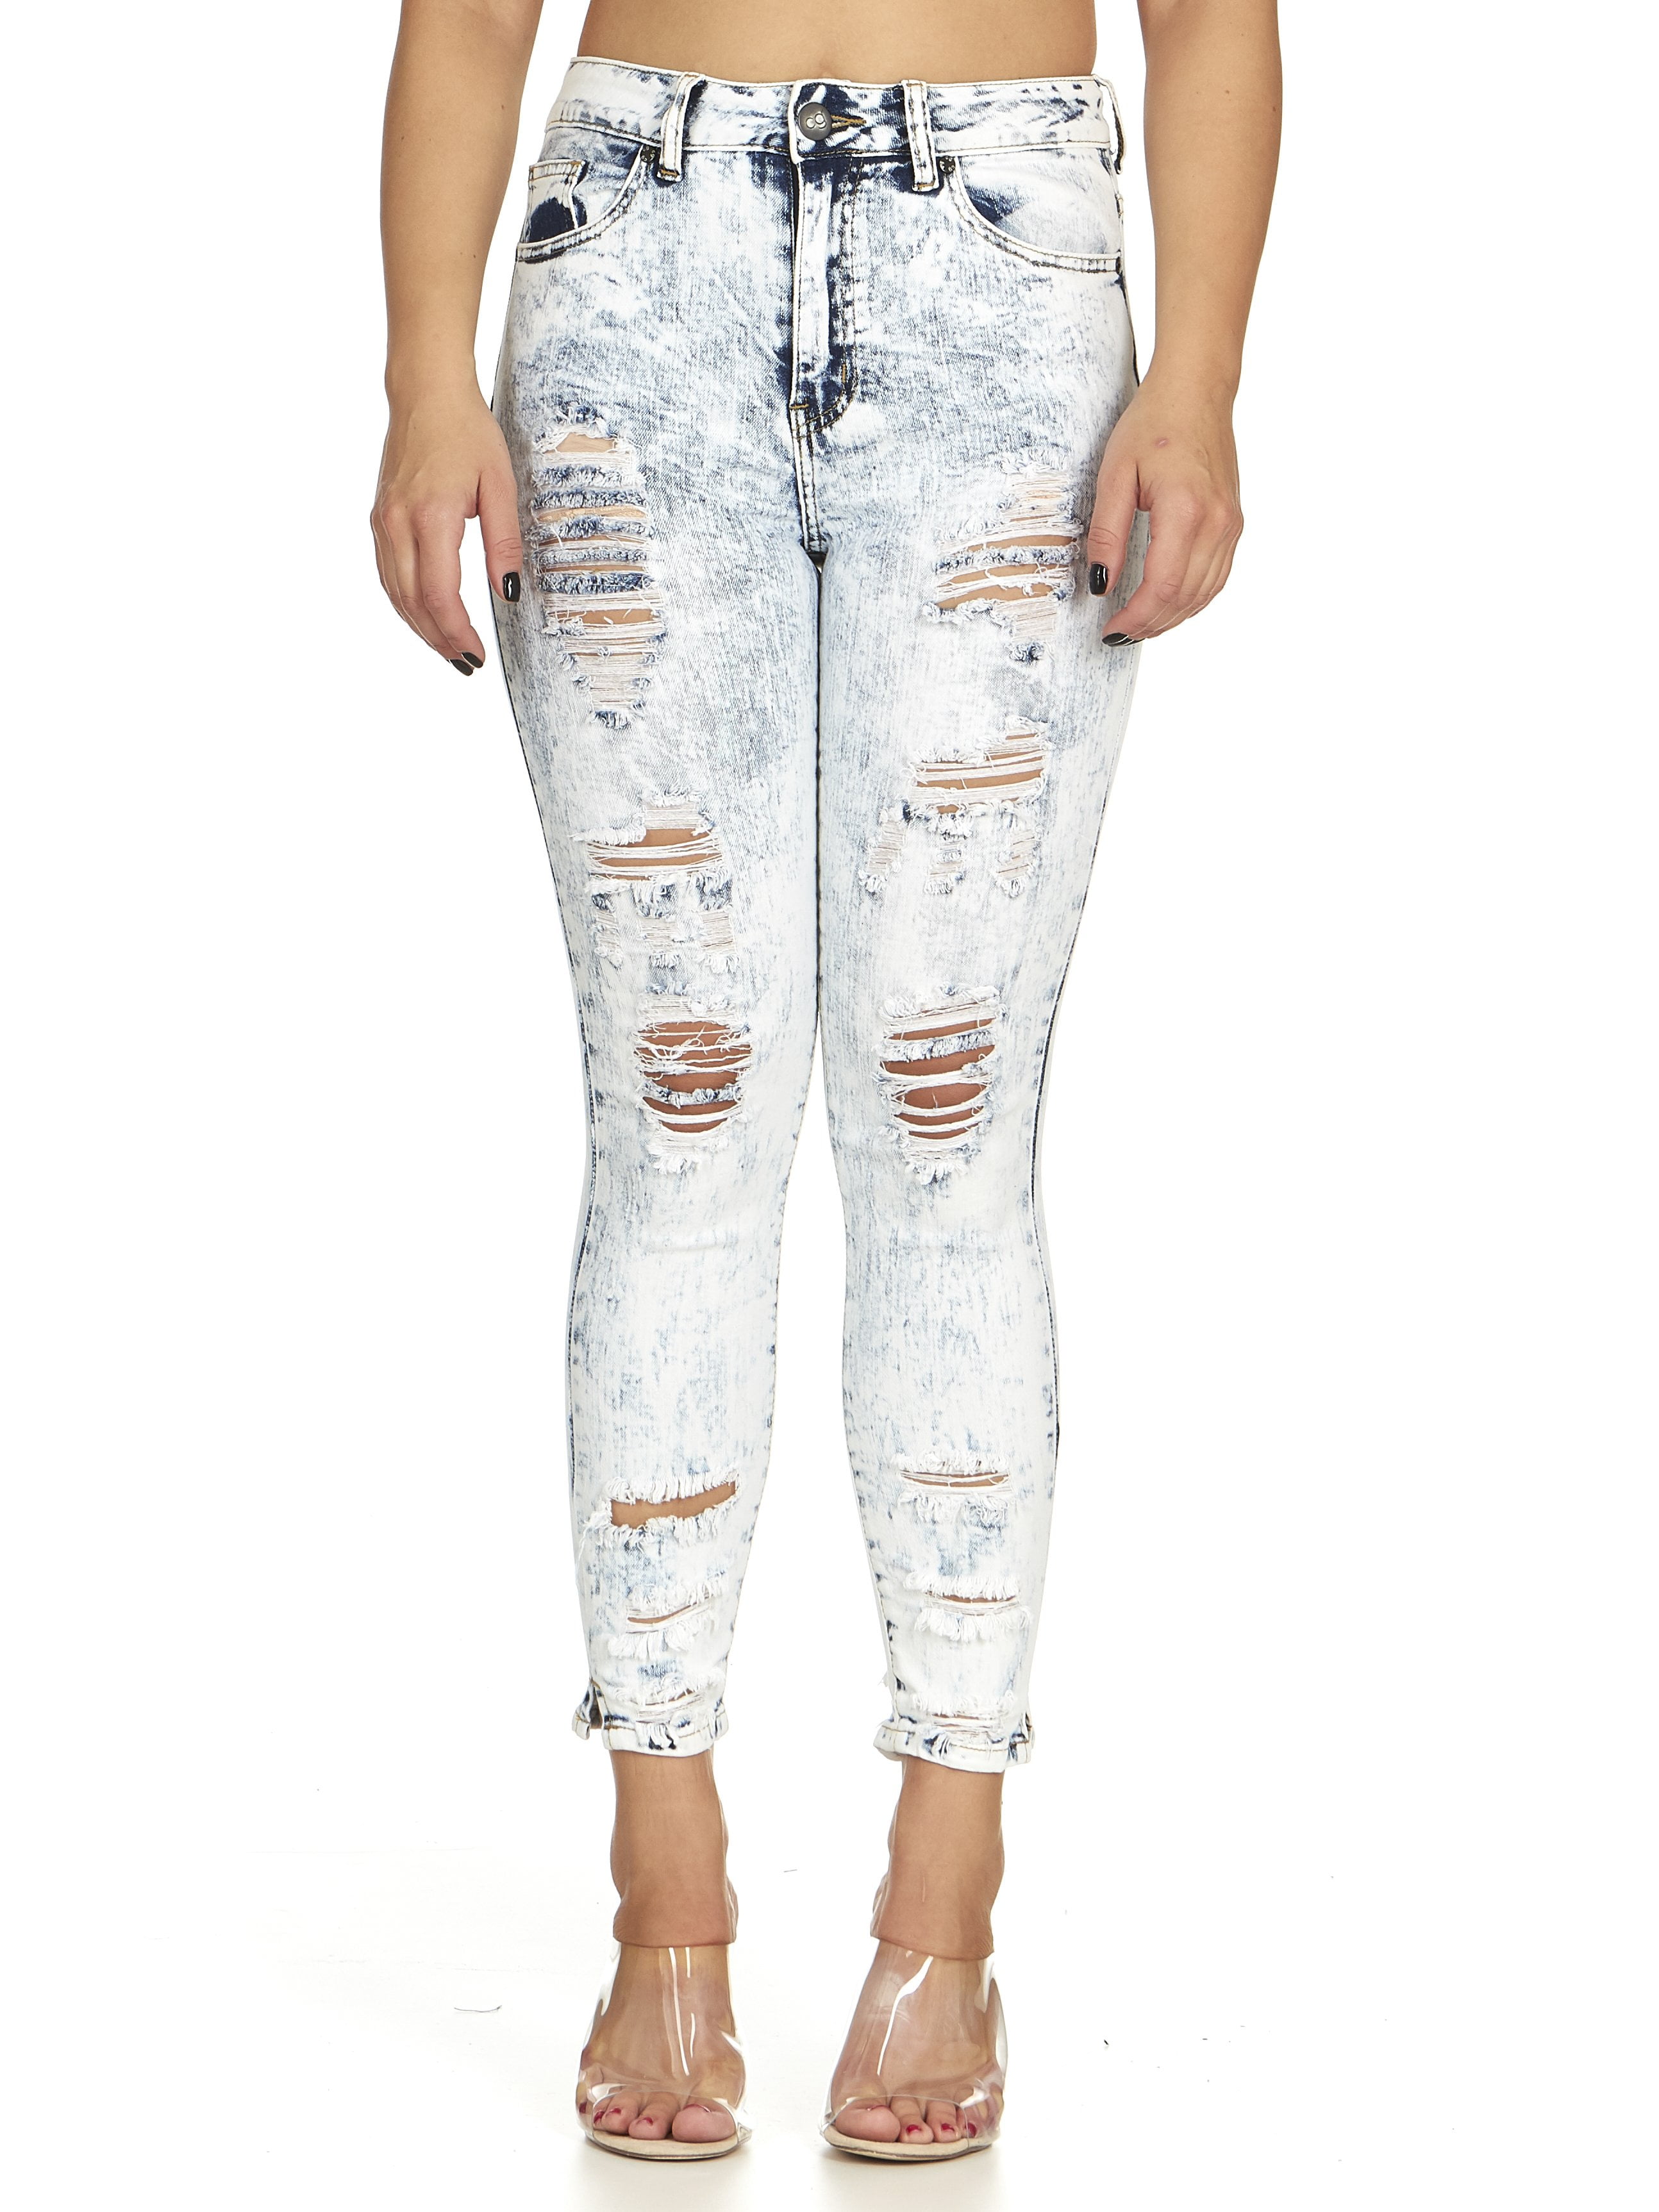 CG Jeans - Cover Girl Women's Distressed Torn Plus Size Skinny Jeans ...